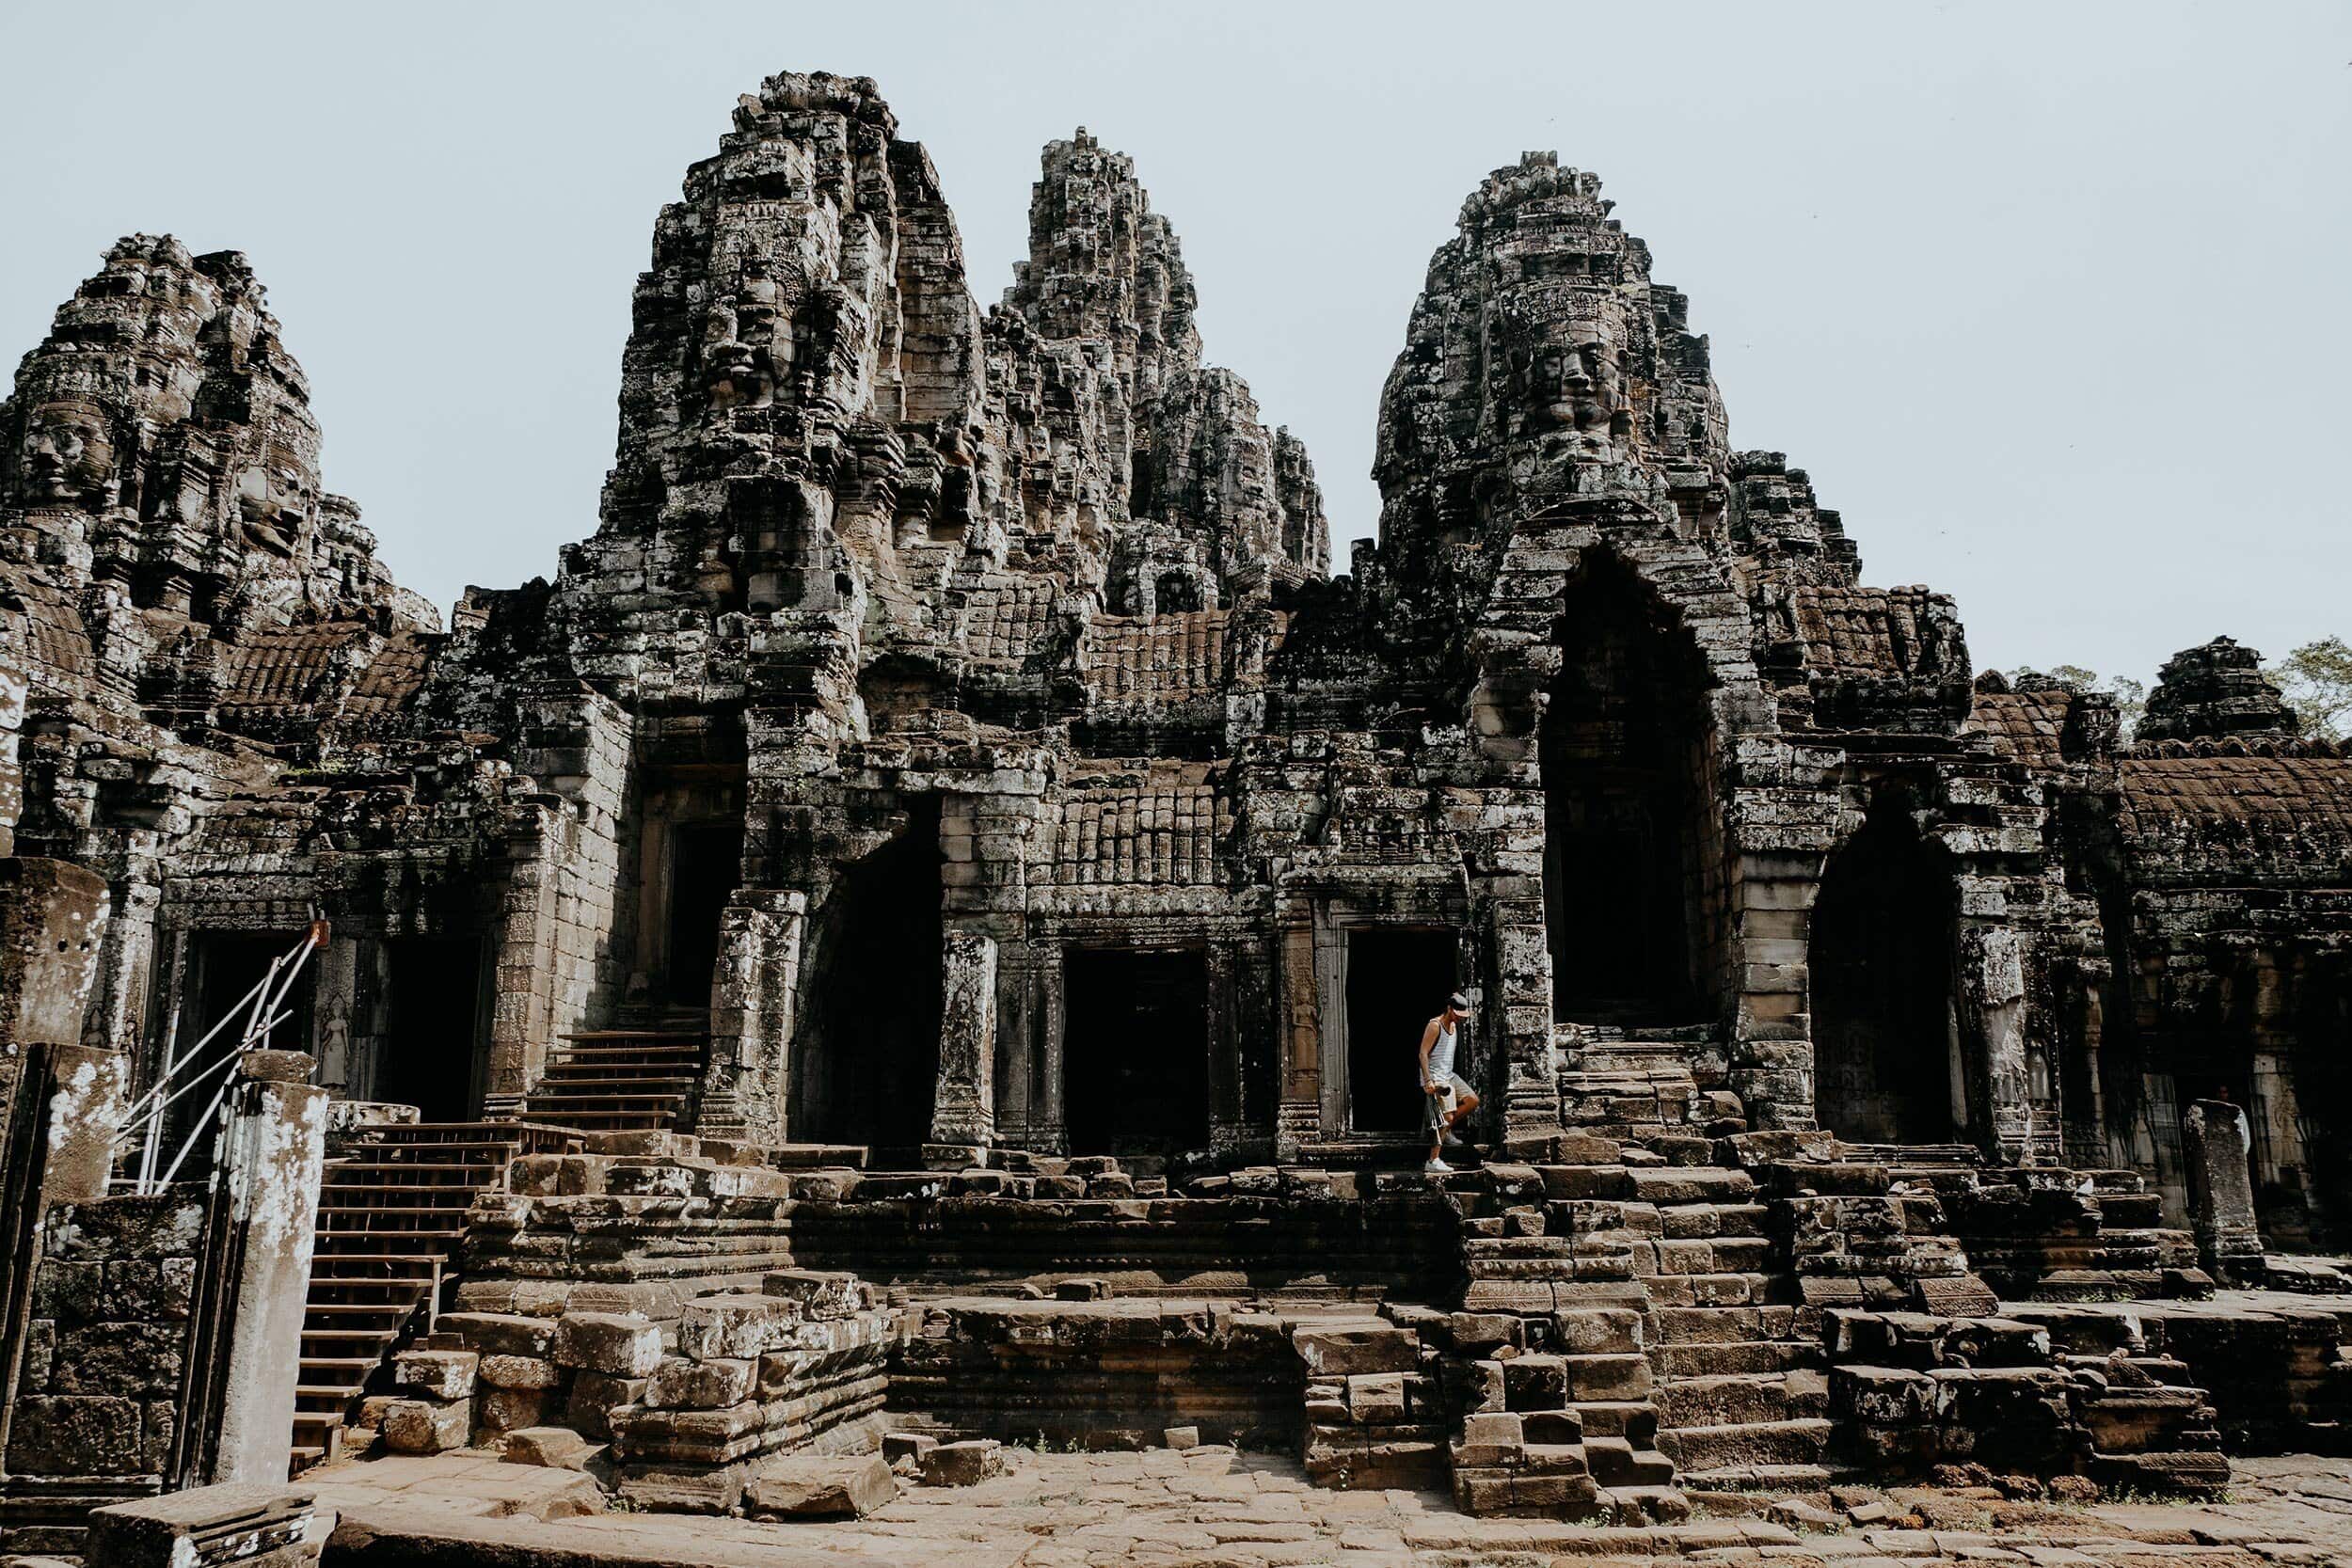 A travellers guide to Angkor Wat